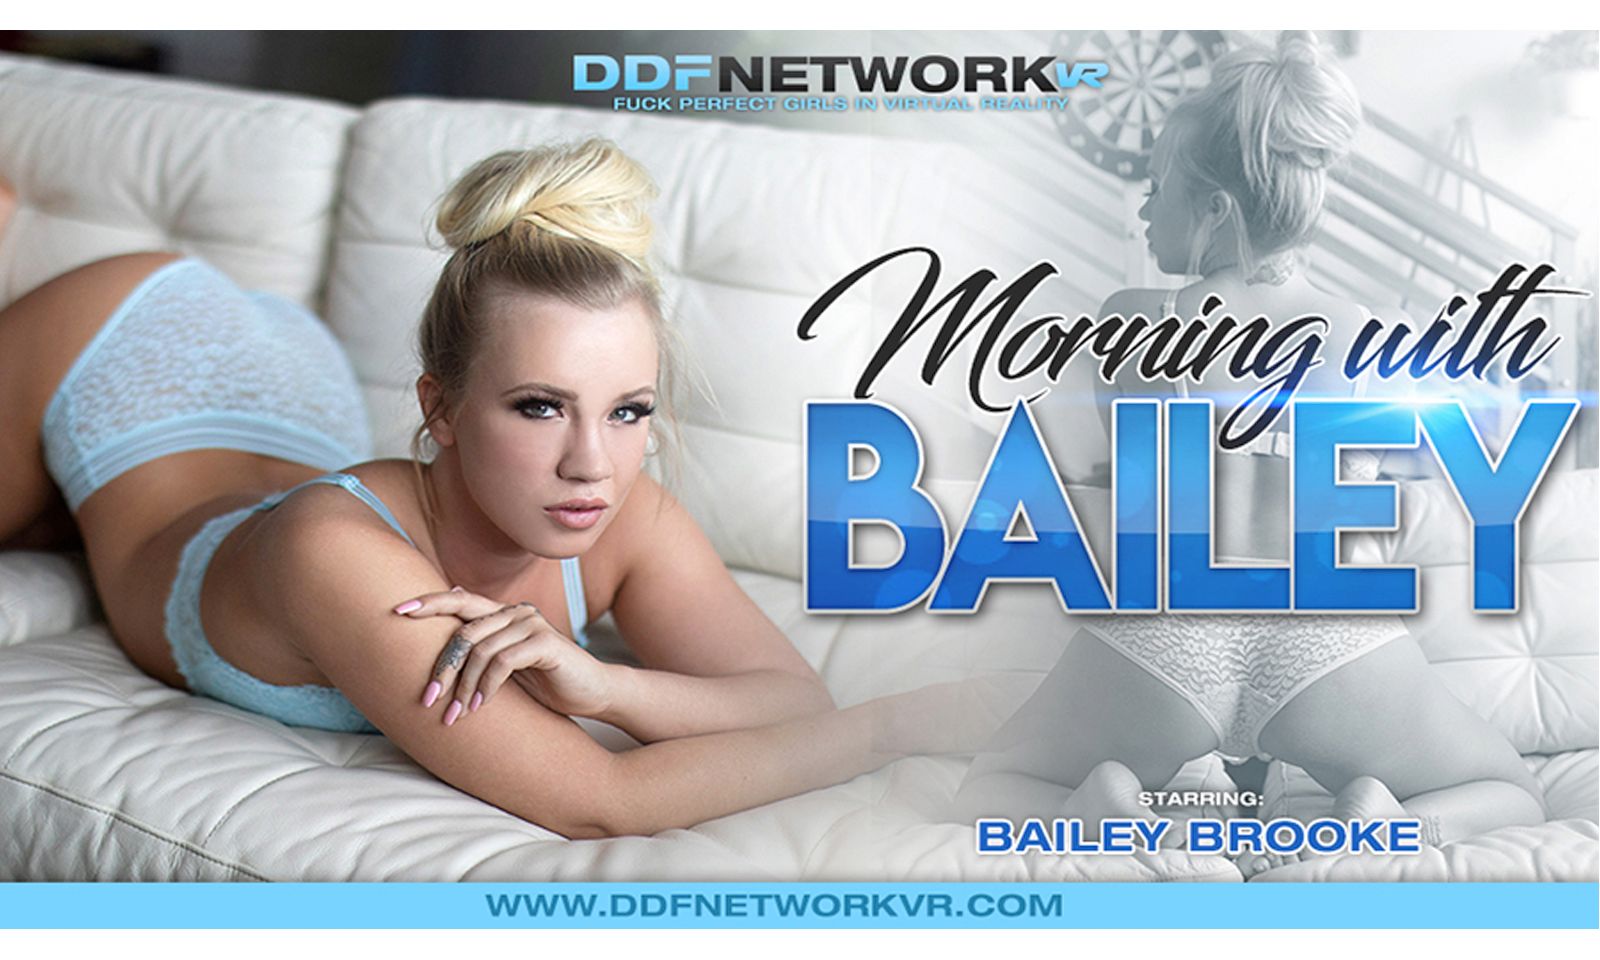 Bailey Brooke Stars in Latest From DDFNetworkVR  